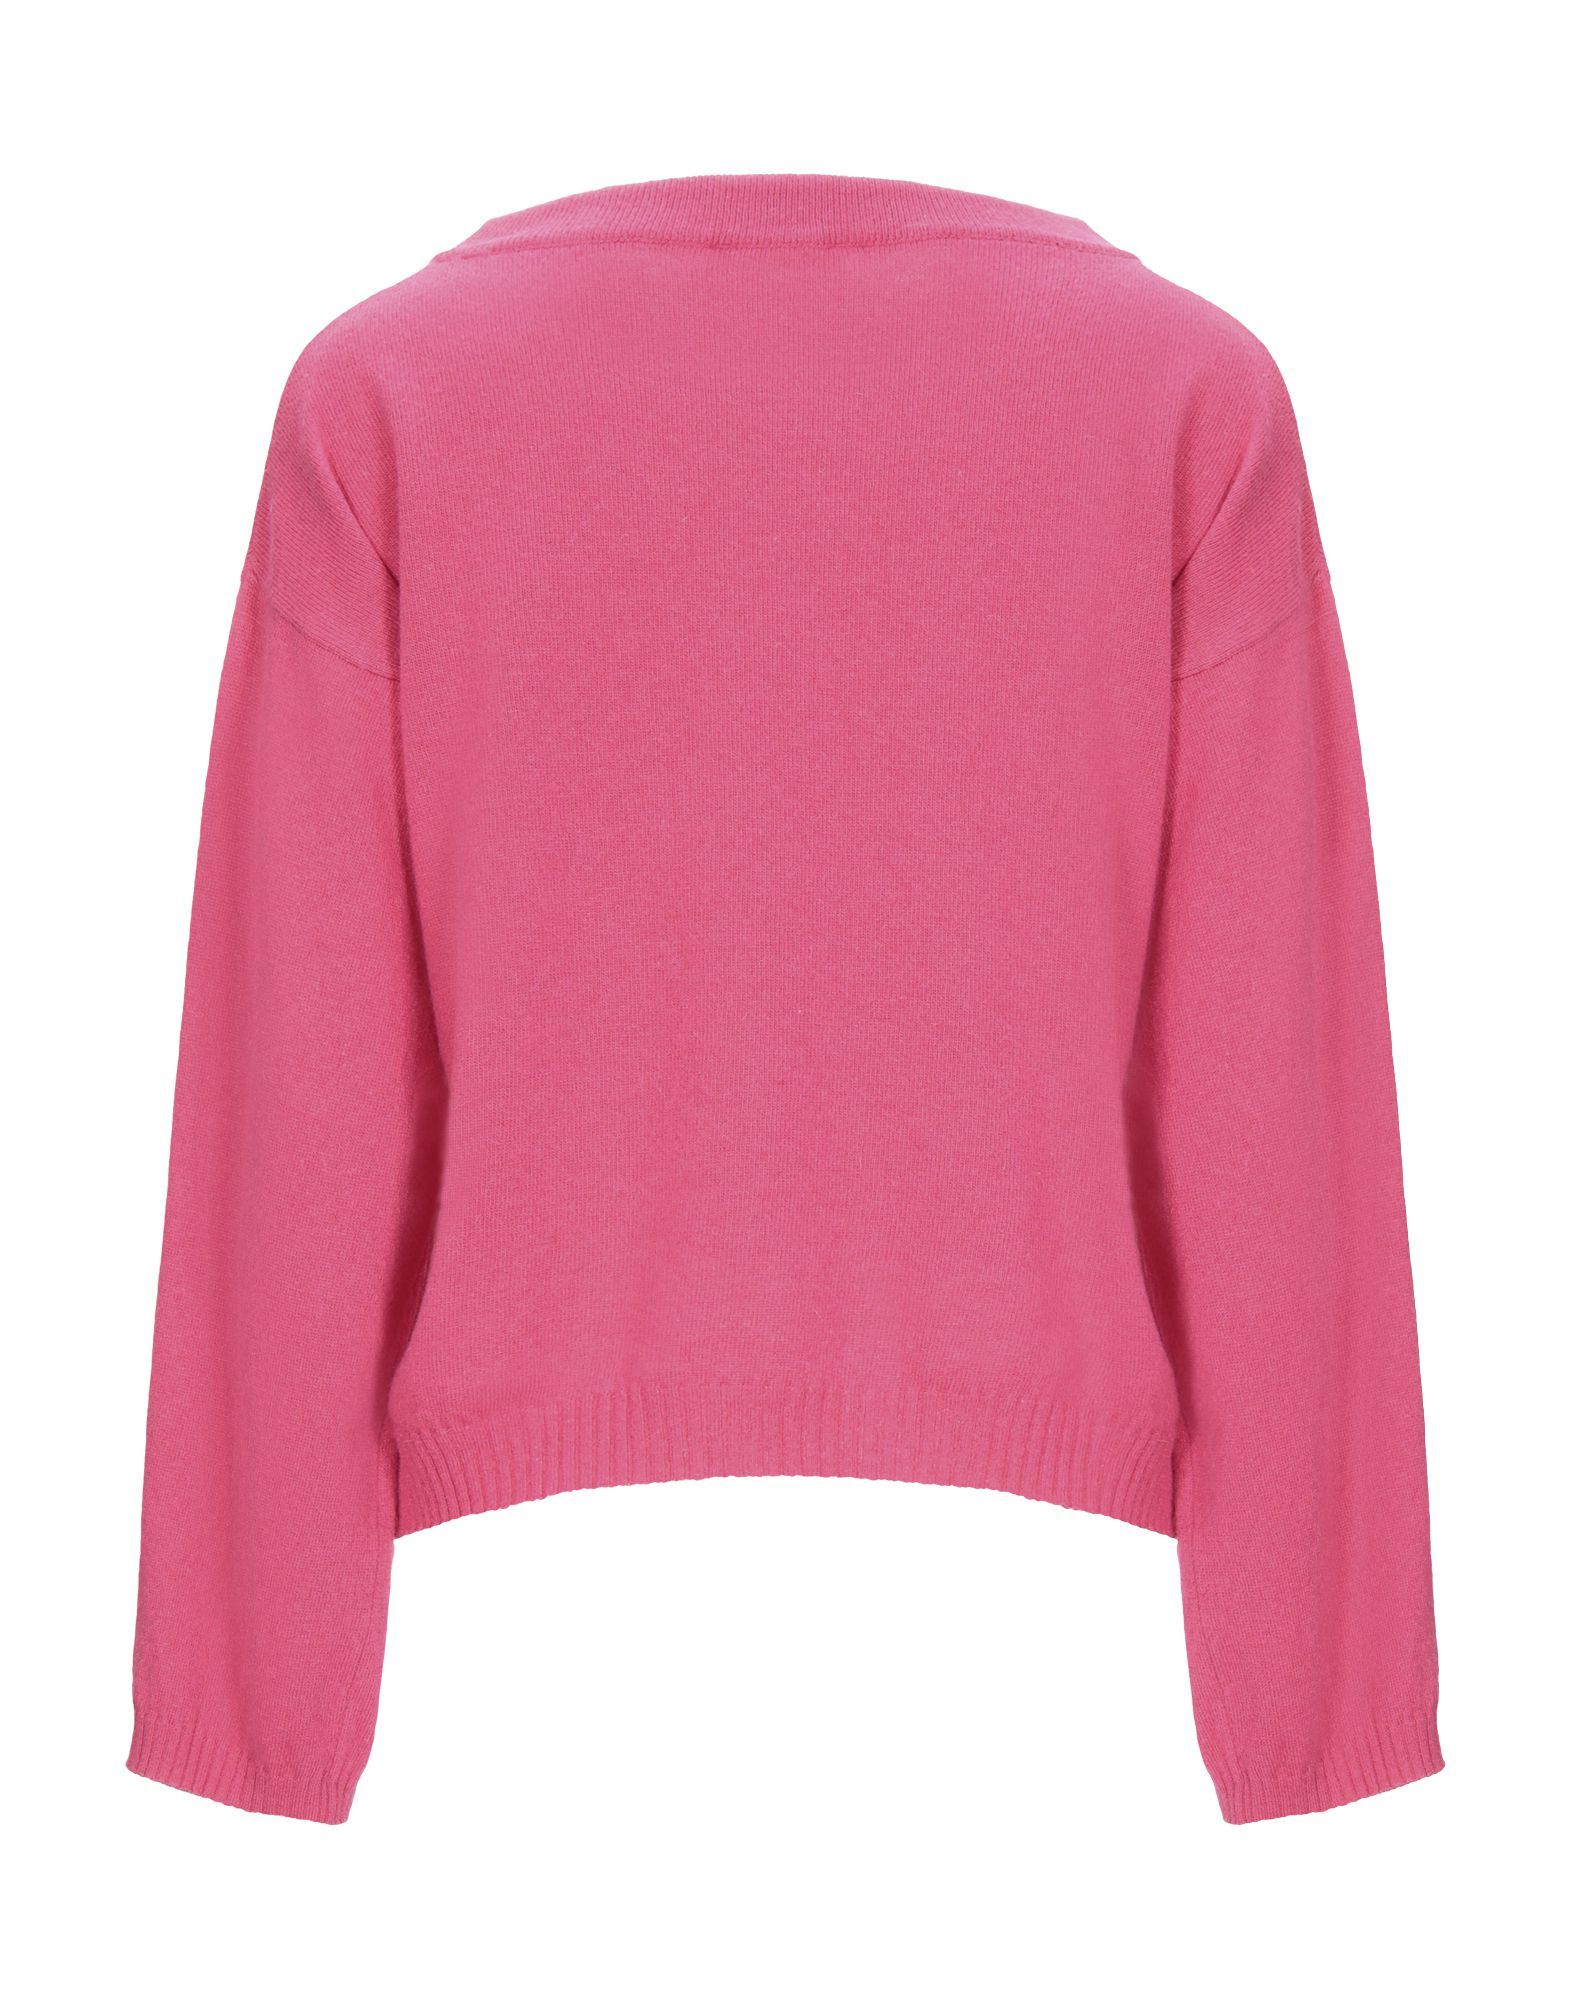 knitted, laces, basic solid colour, round collar, lightweight knitted, long sleeves, no pockets